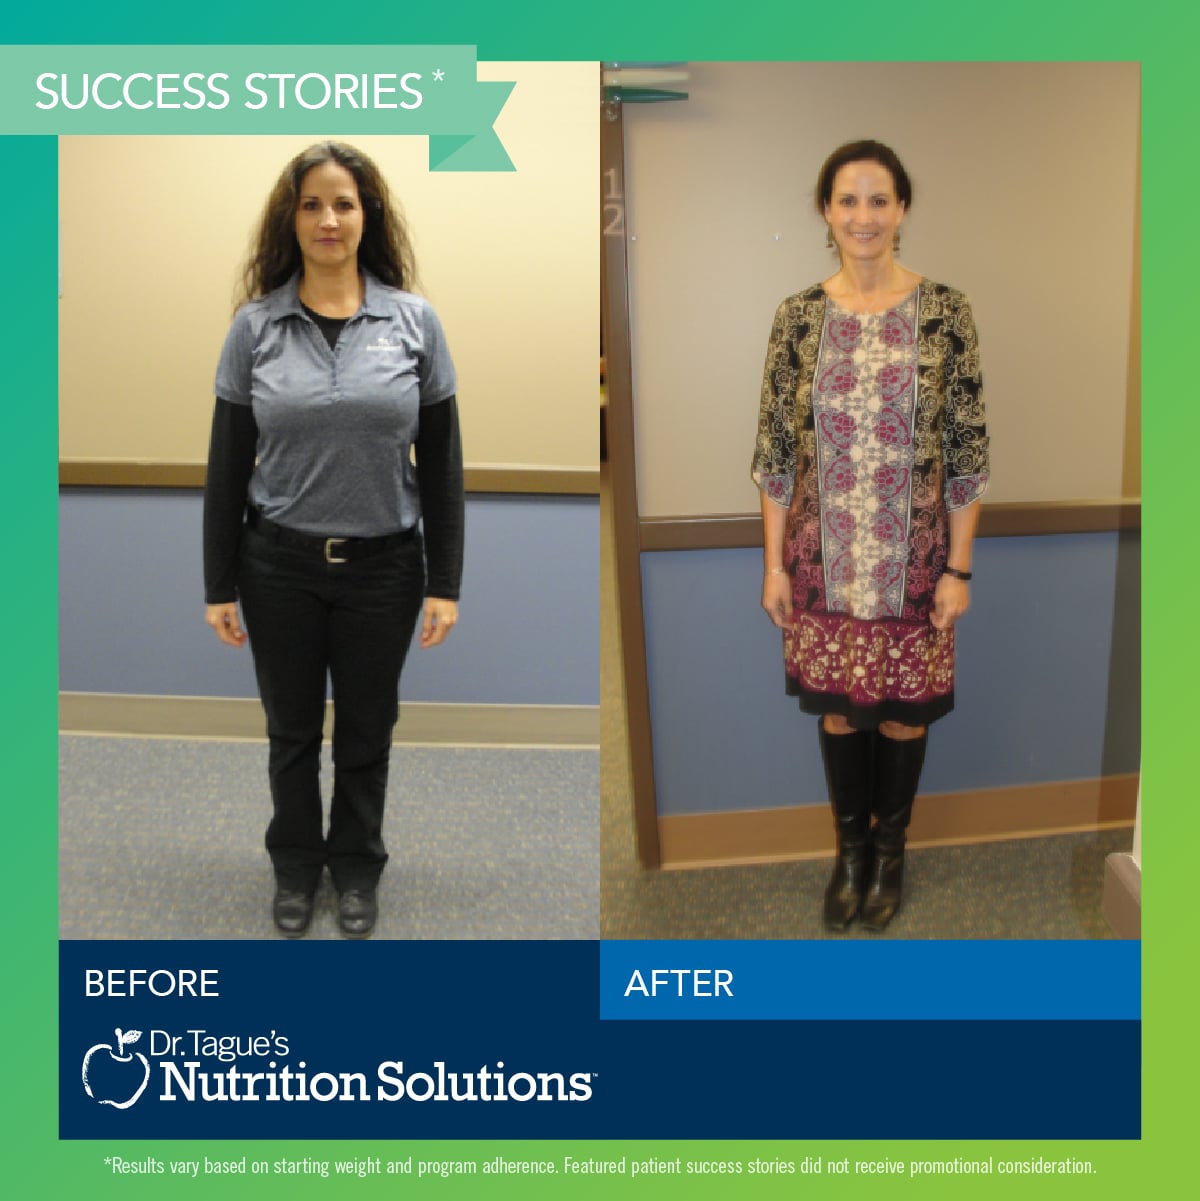 Christina lost 38lbs. on Dr. Tague's Program!